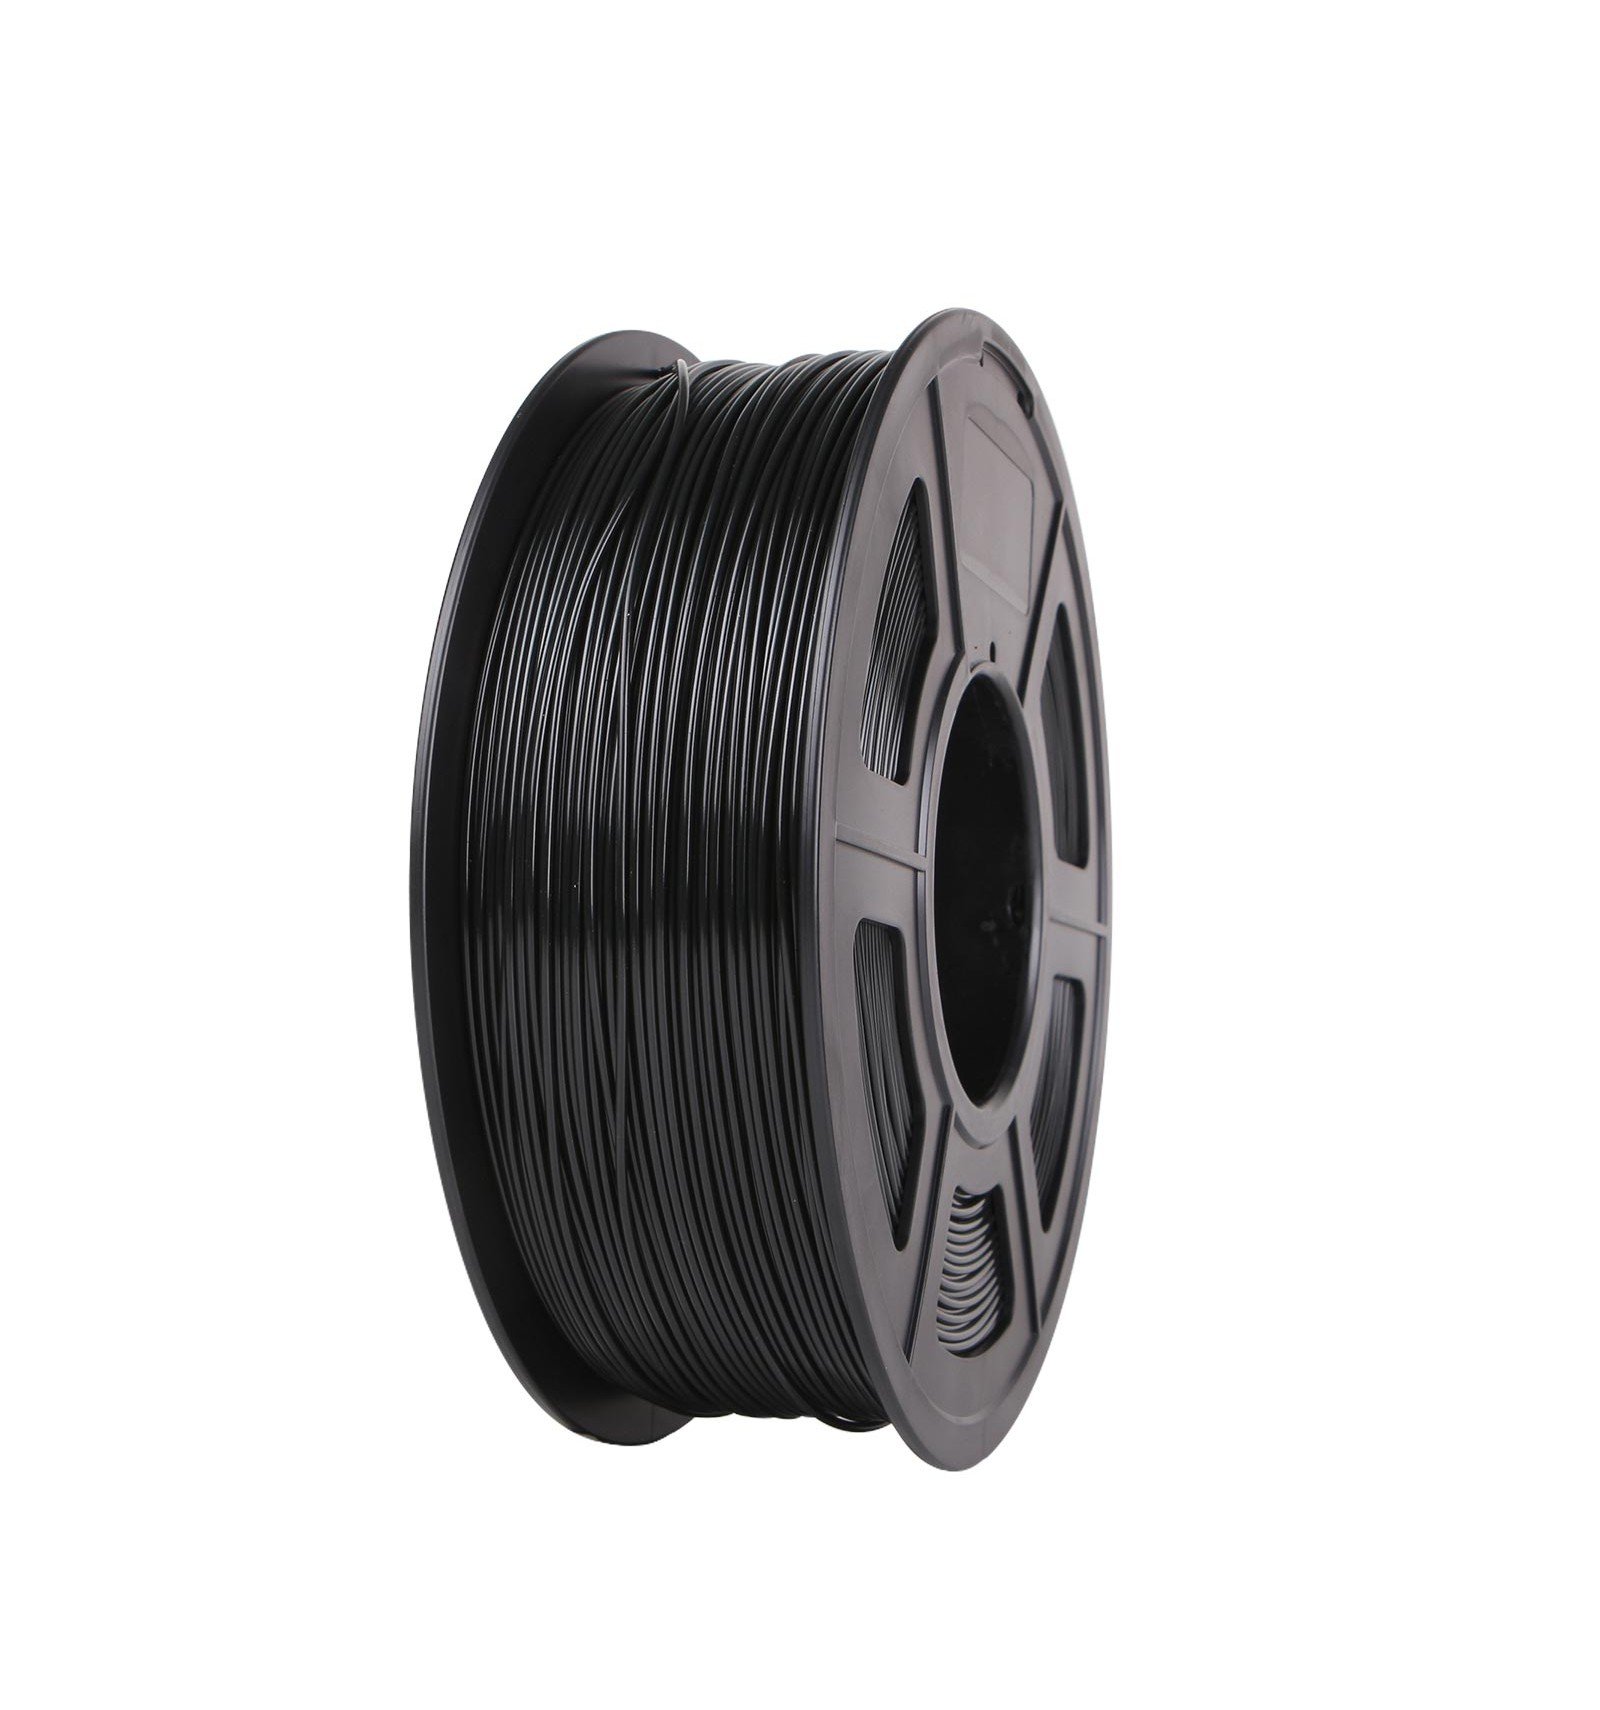 How To Succeed When 3D Printing With ASA Filament // 3D Printing Filament  Guide 